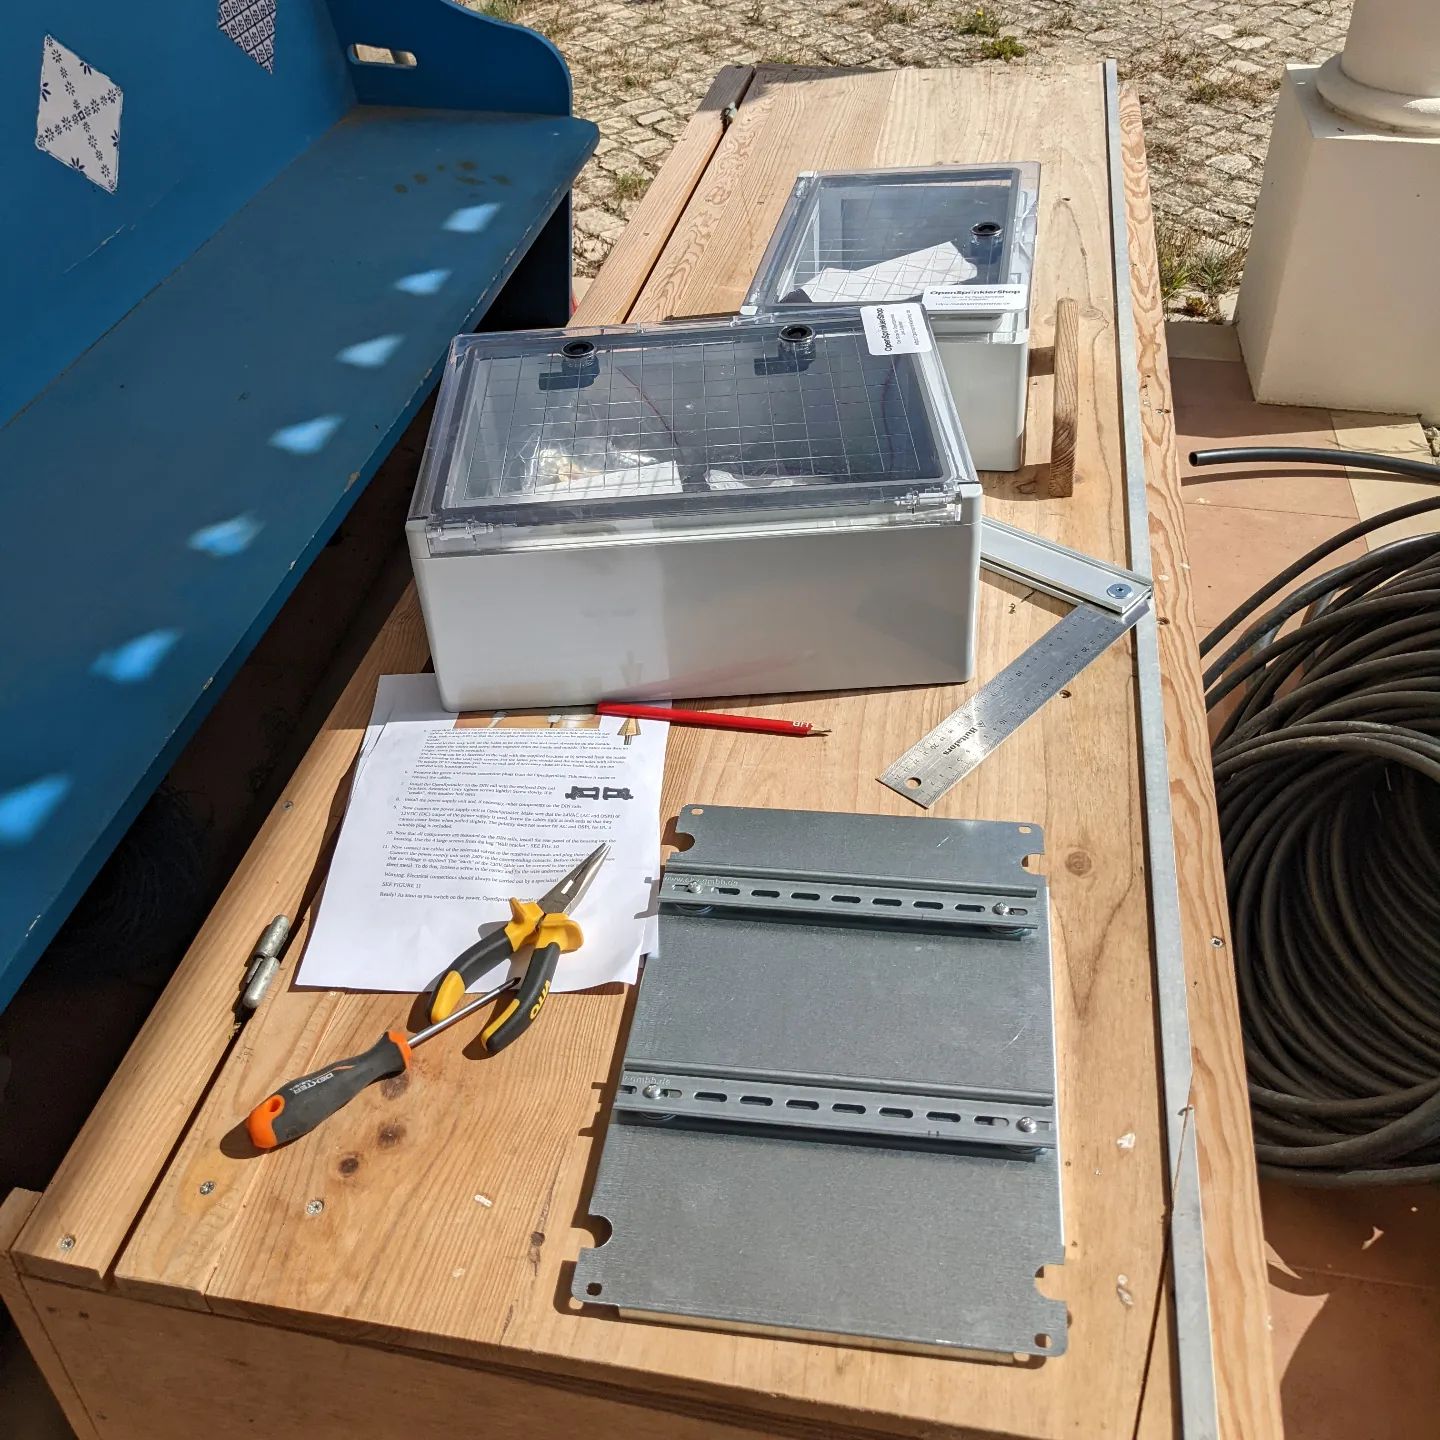 Assembling the waterproof enclosures for the irrigation controllers